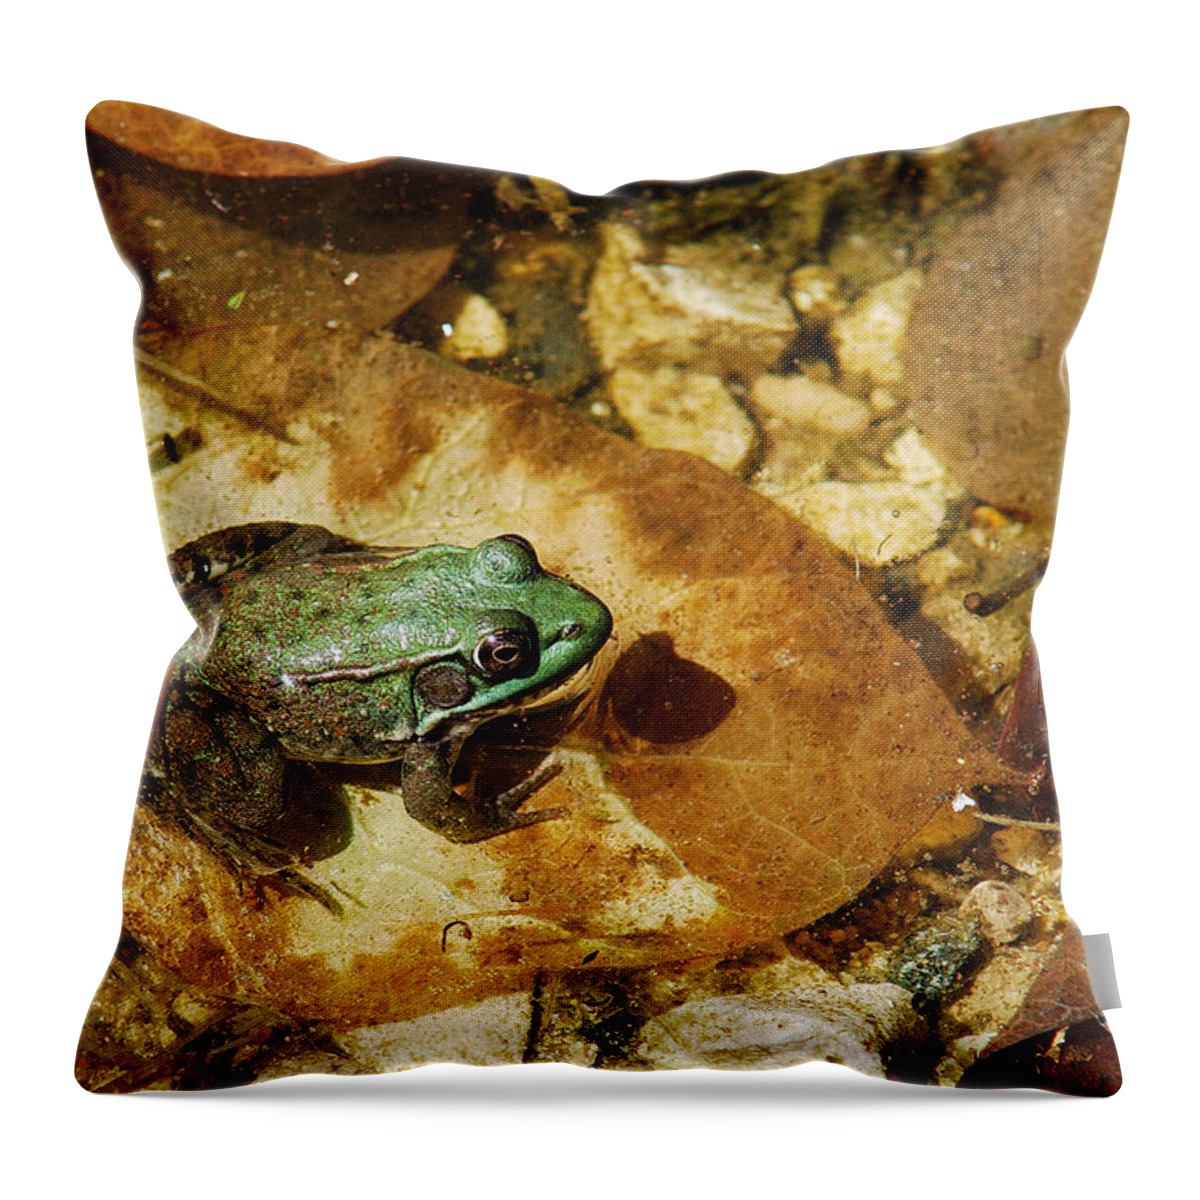 Jma Throw Pillow featuring the photograph Frog And A Ladybug by Janice Adomeit